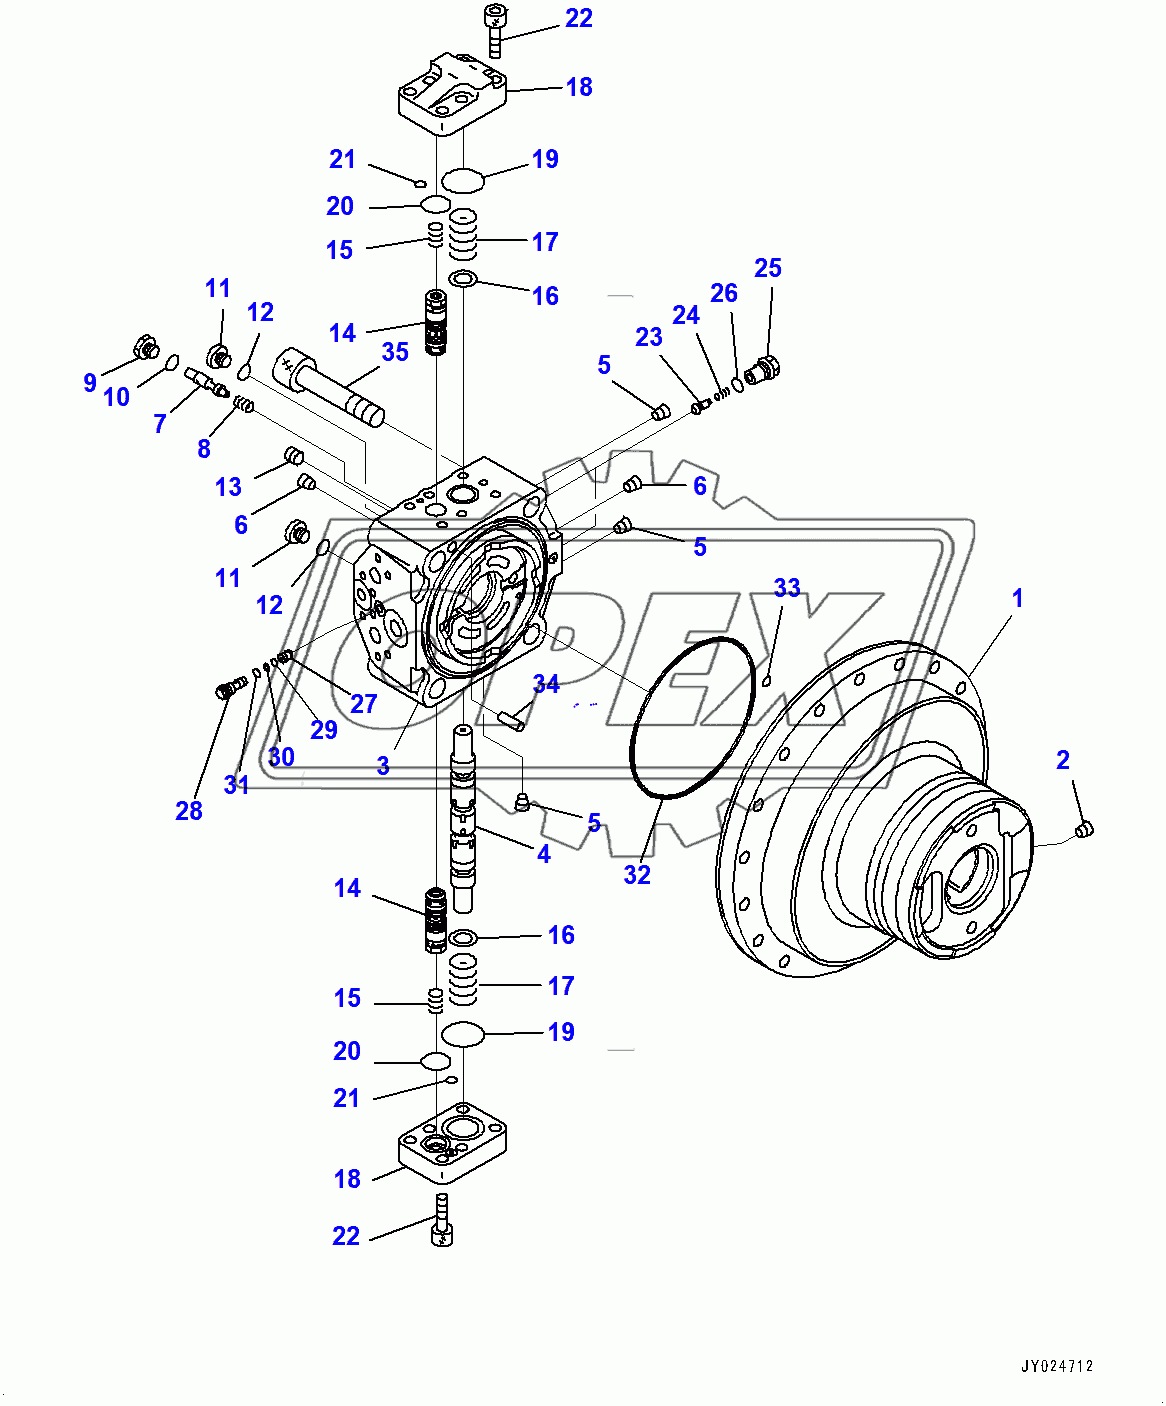  Travel Motor and Final Drive, Travel Motor, L.H. (1/2) (400127-)